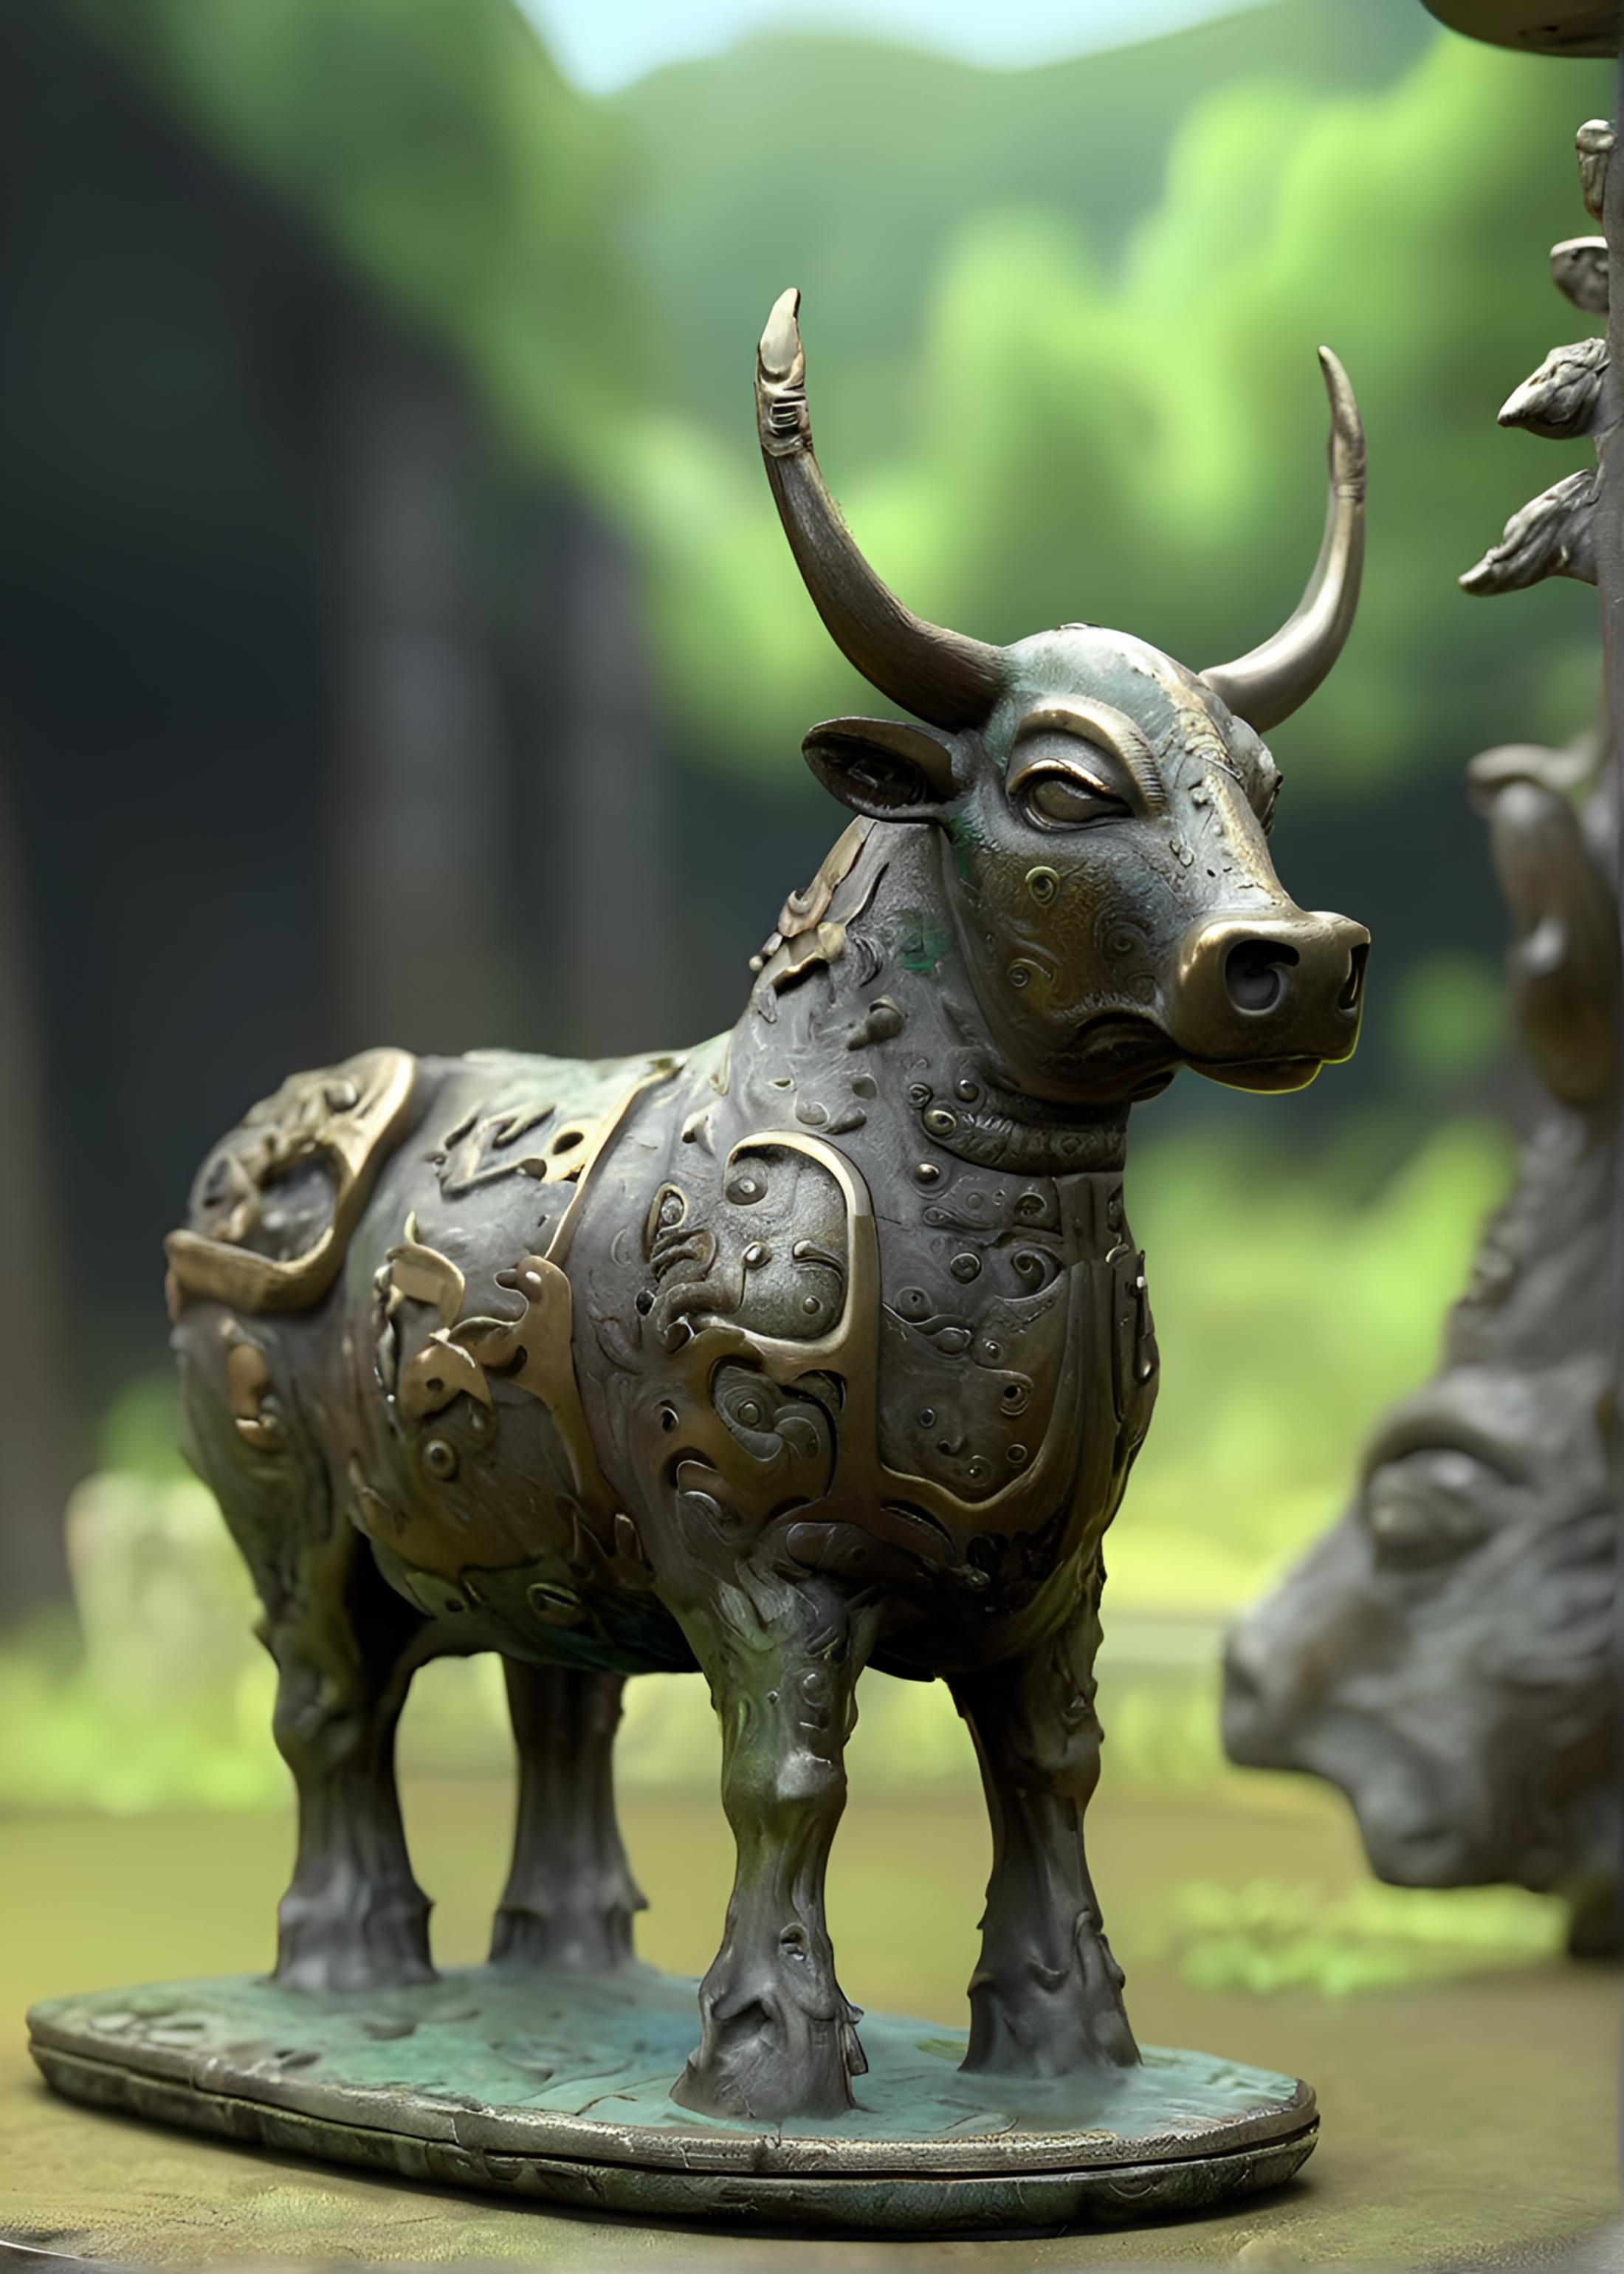 XL Realistic bronze art style image by Standspurfahrer